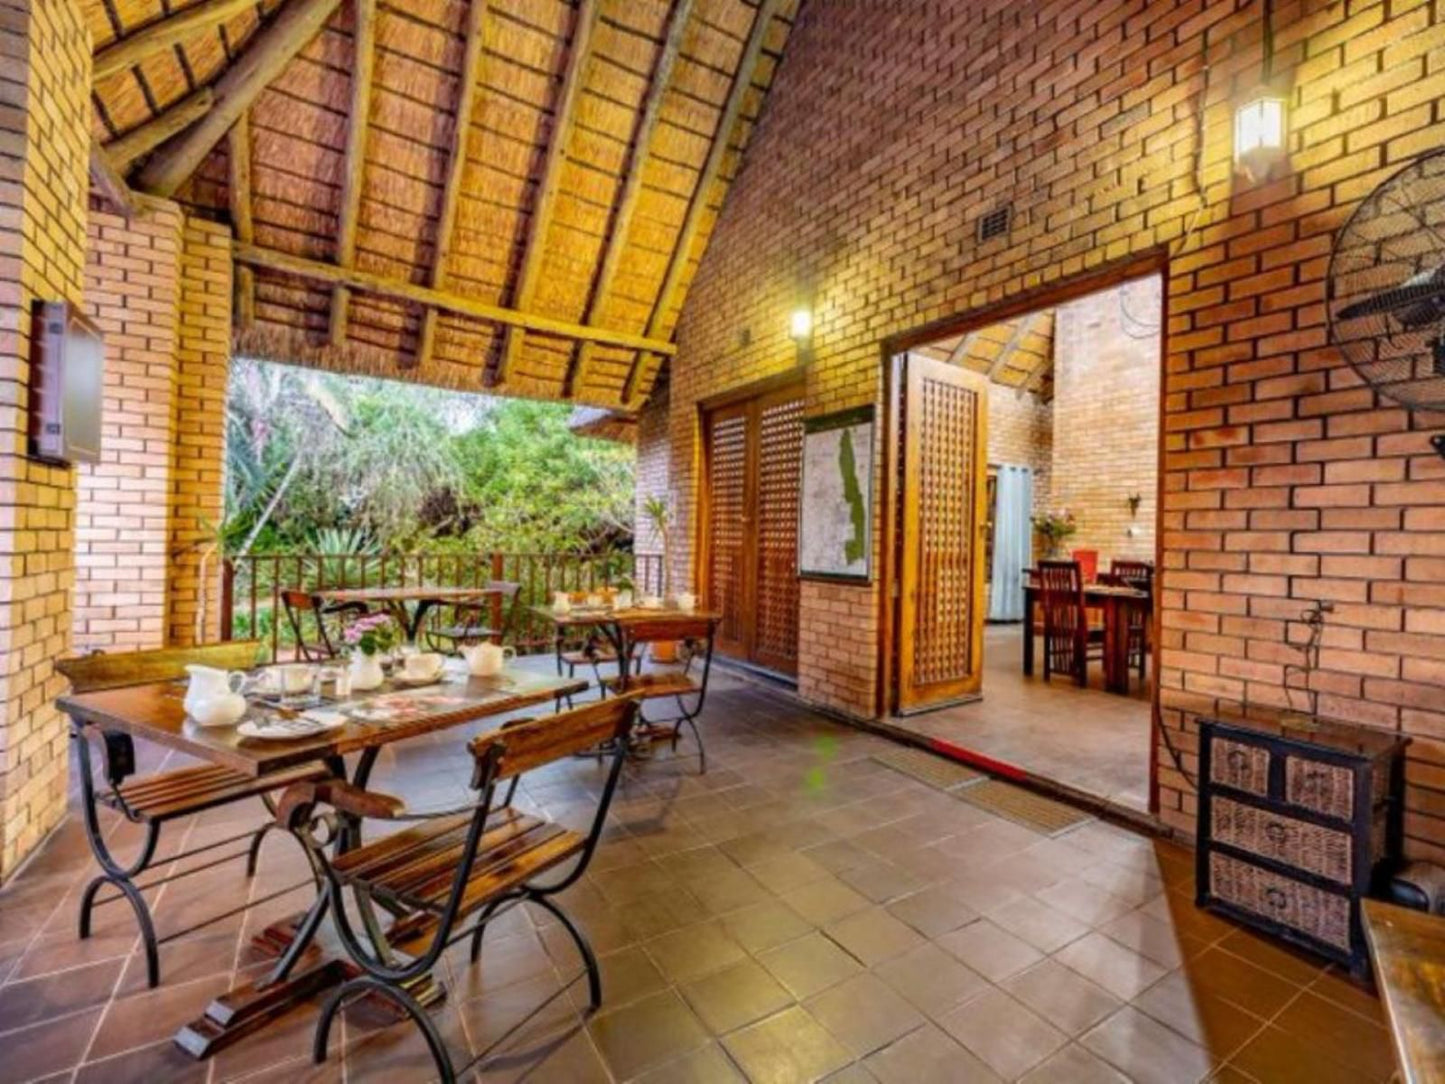 Dreamfields Guesthouse Hazyview Mpumalanga South Africa Brick Texture, Texture